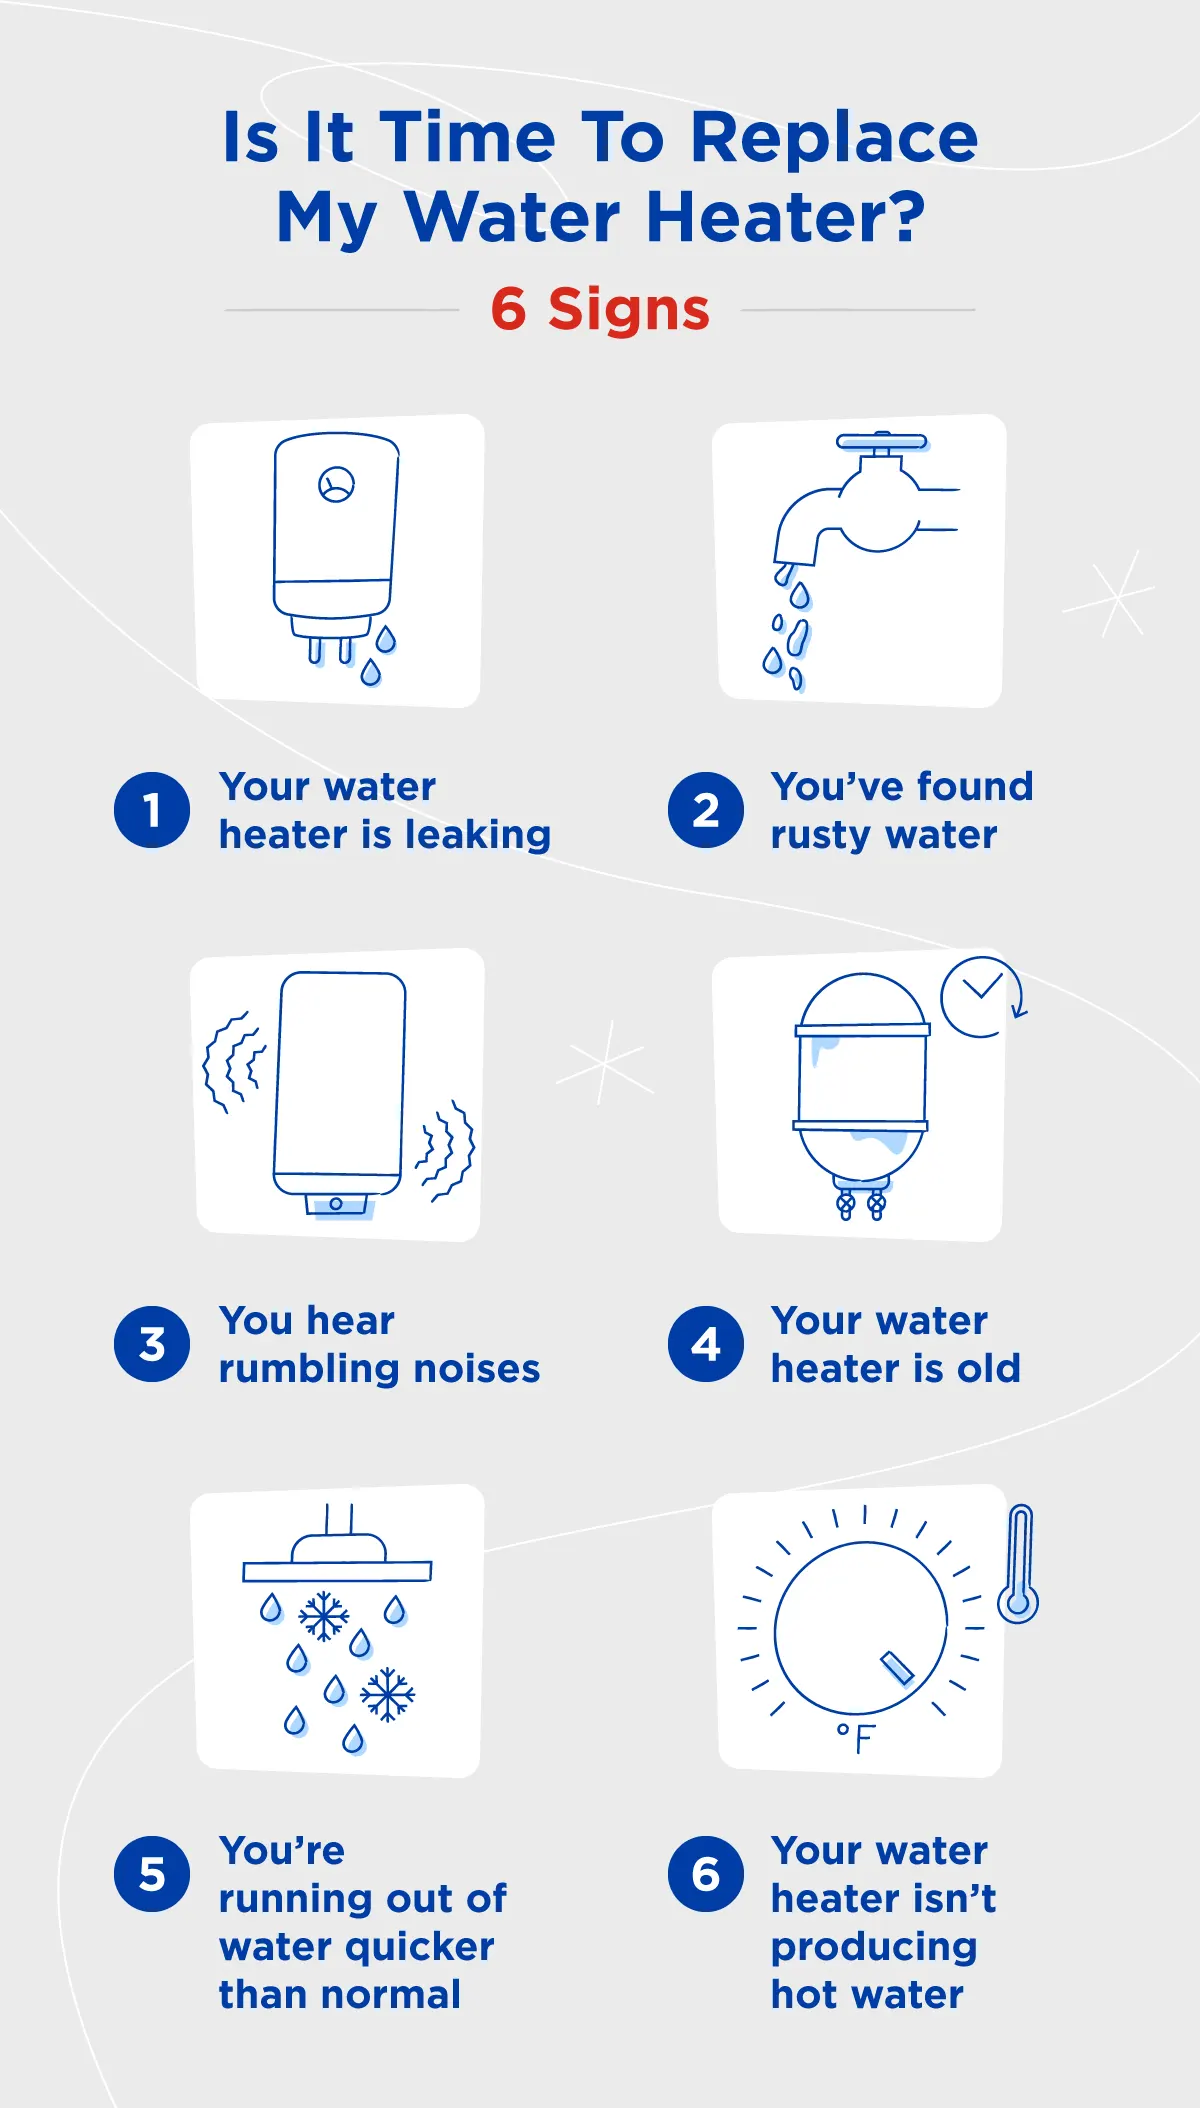 Signs it's time to replace your water heater.